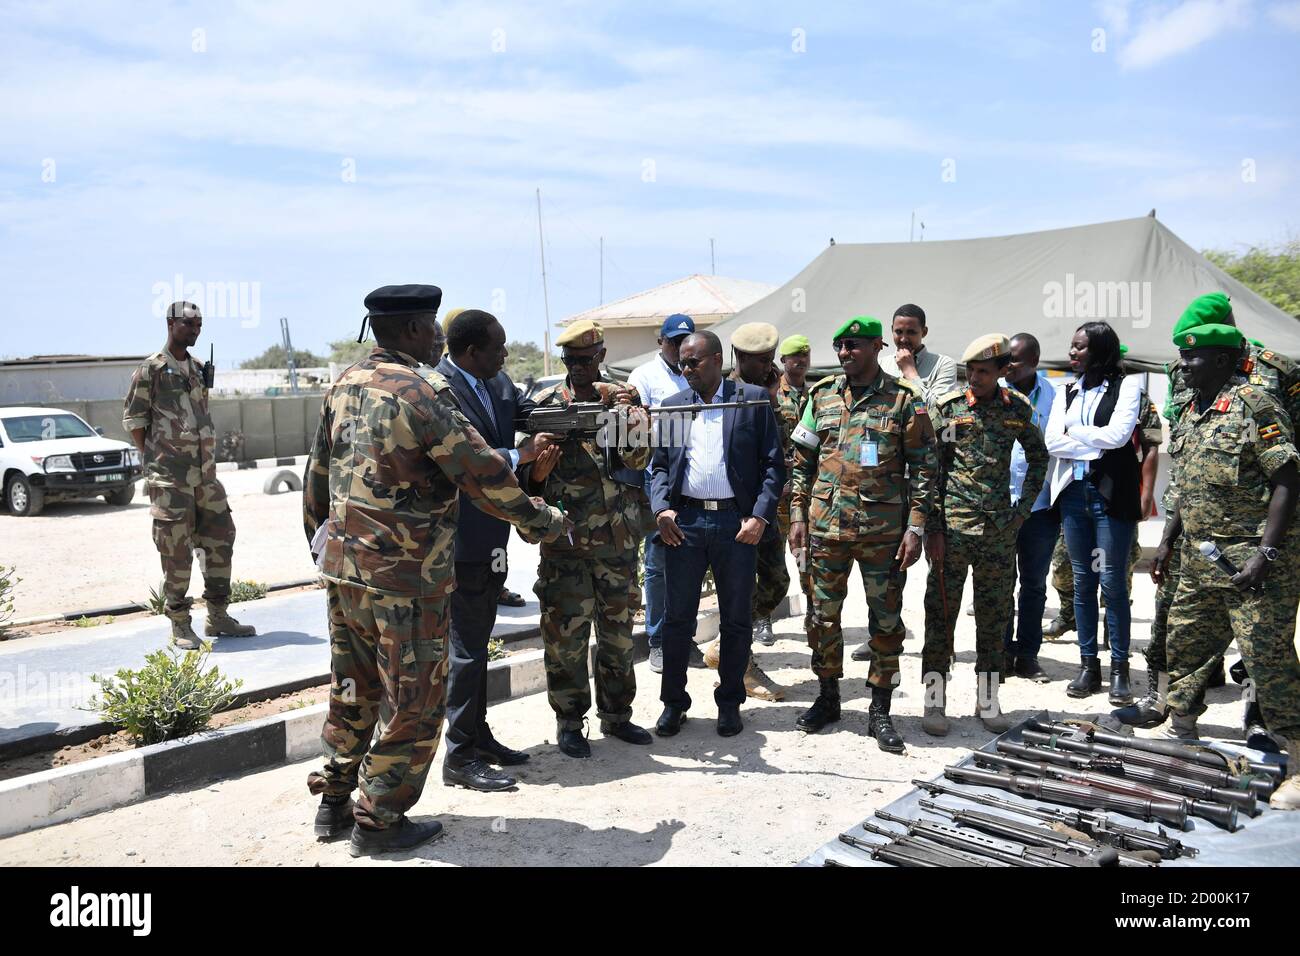 The Head of the African Union Mission in Somalia Ambassador Francisco Madeira (wearing a tie), hands over captured weapons to Head of SNA Armoury Gen. Hassan Sheikh Abdisamad, in Mogadishu on 27 February 2020. Stock Photo